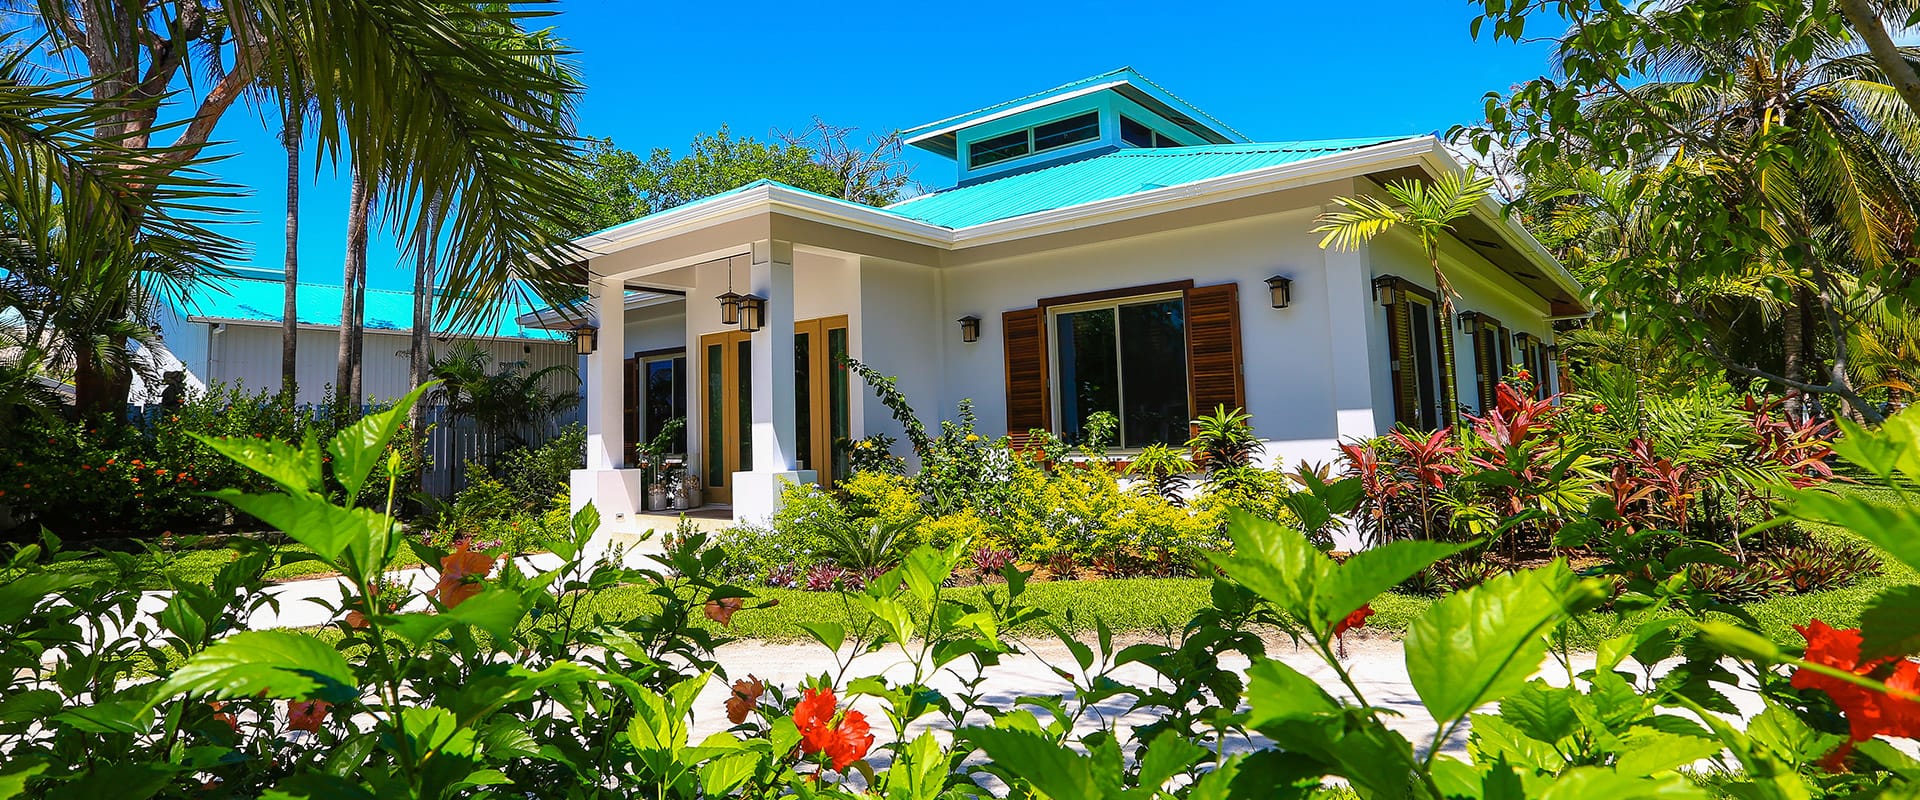 Exterior of Victoria House Spa, Belize